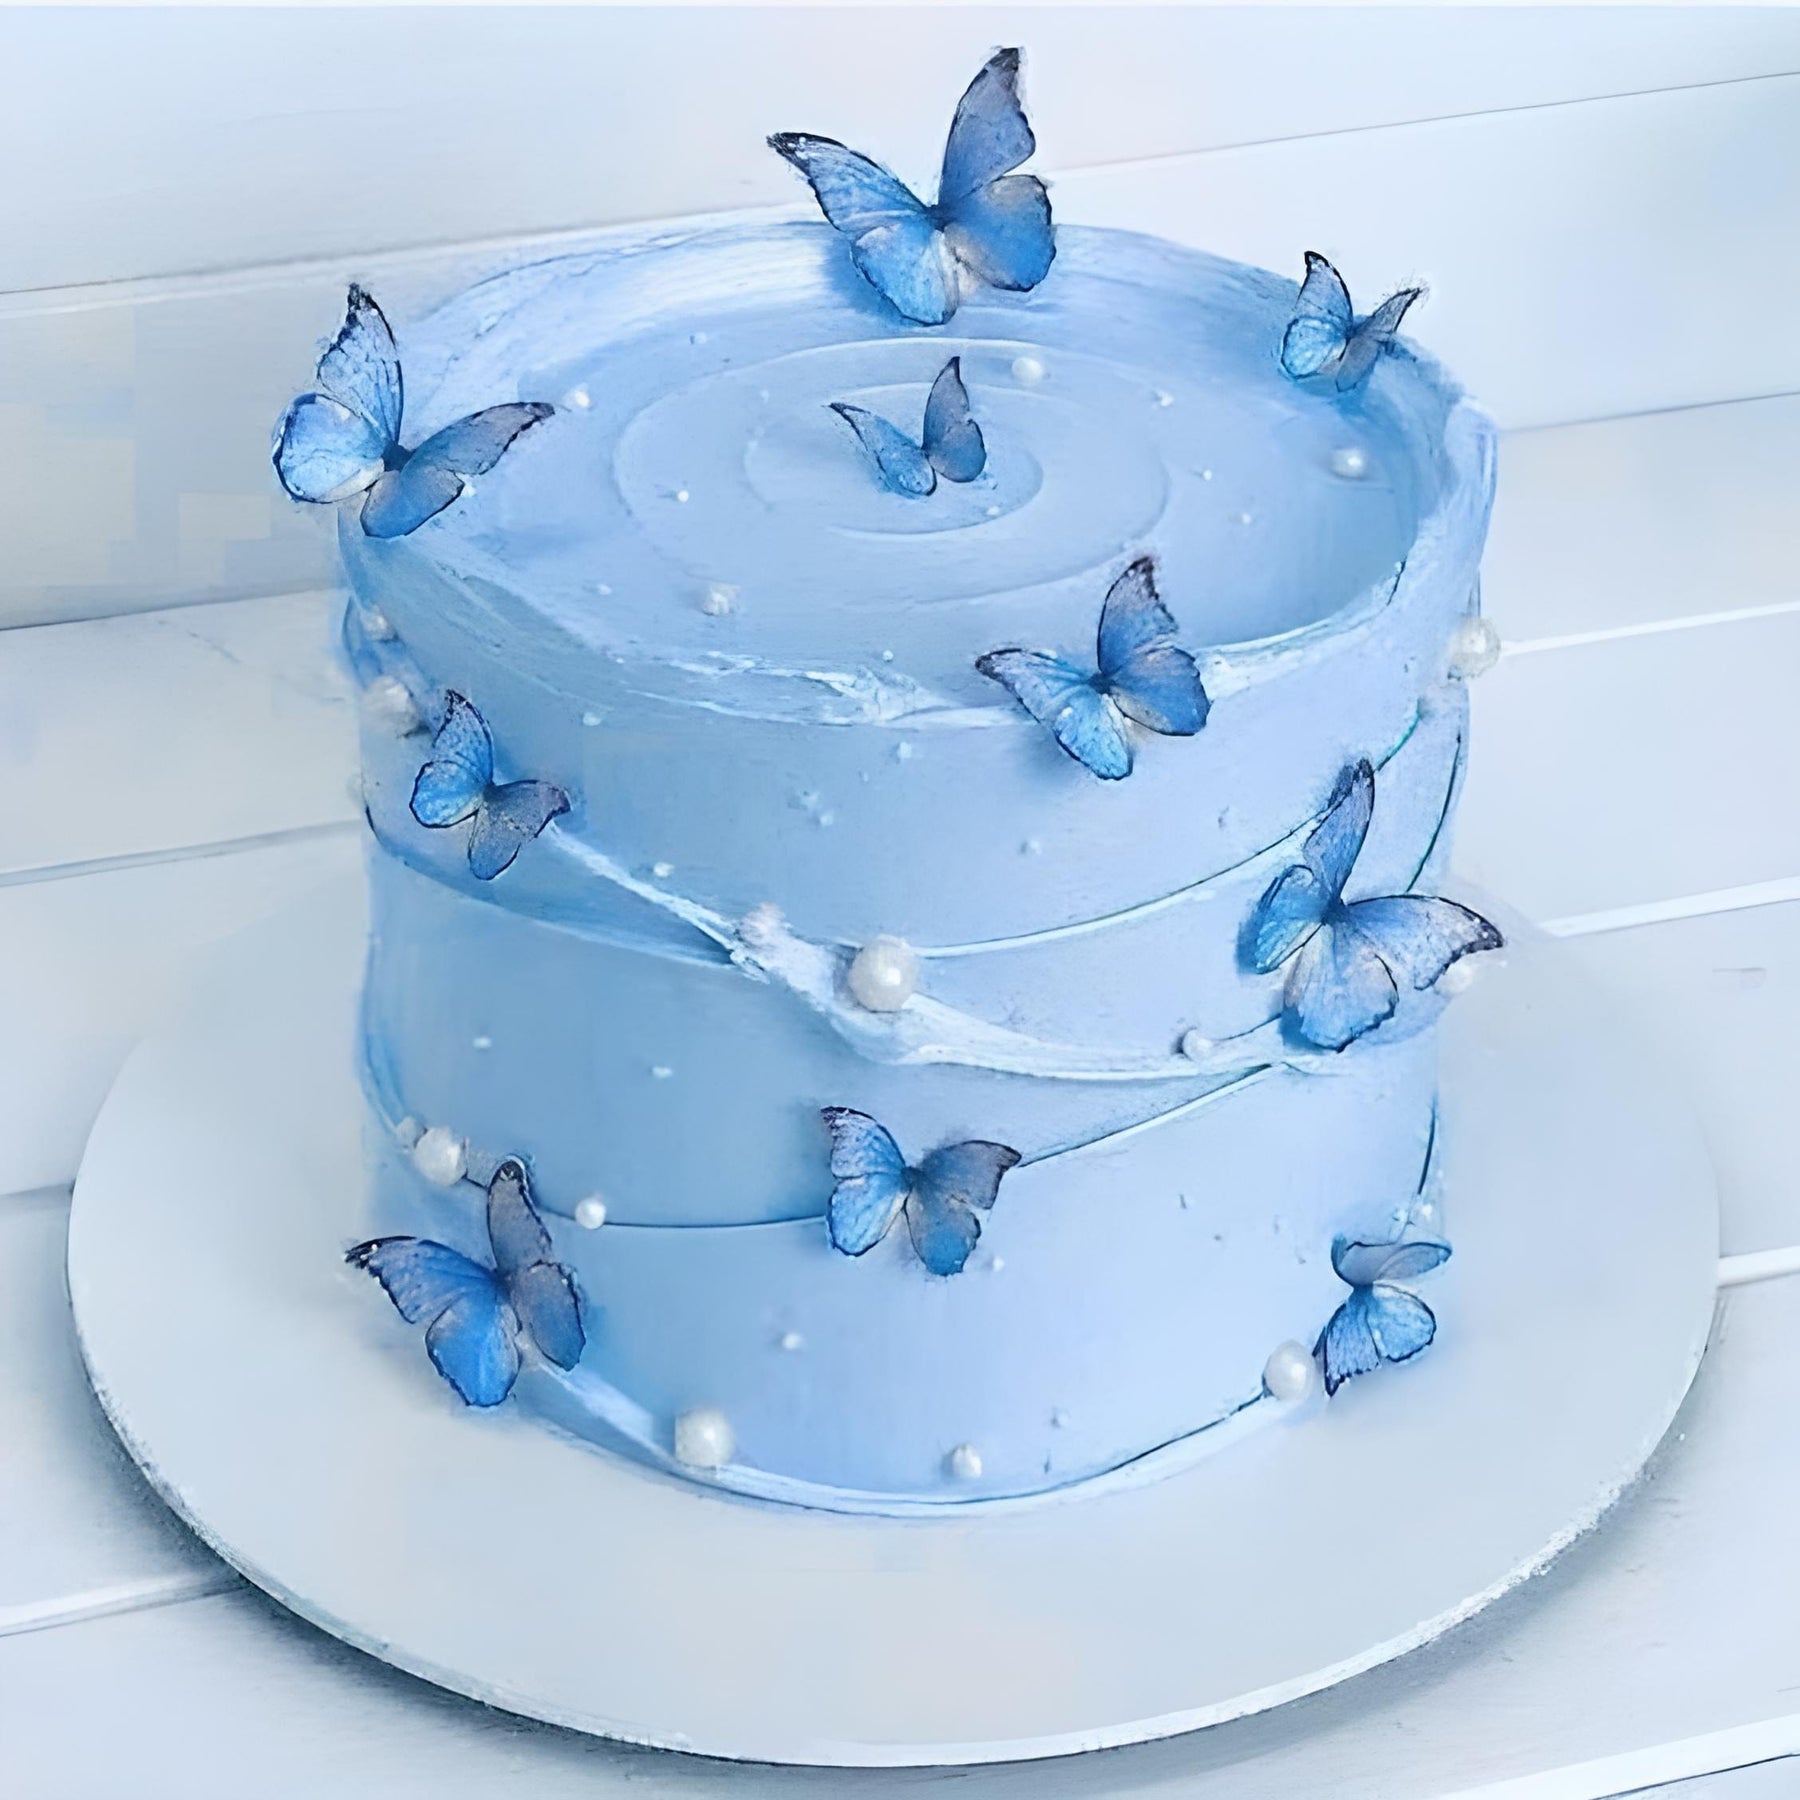 Deliciously Delivered or Collected: Order Birthday Cakes Online Today!